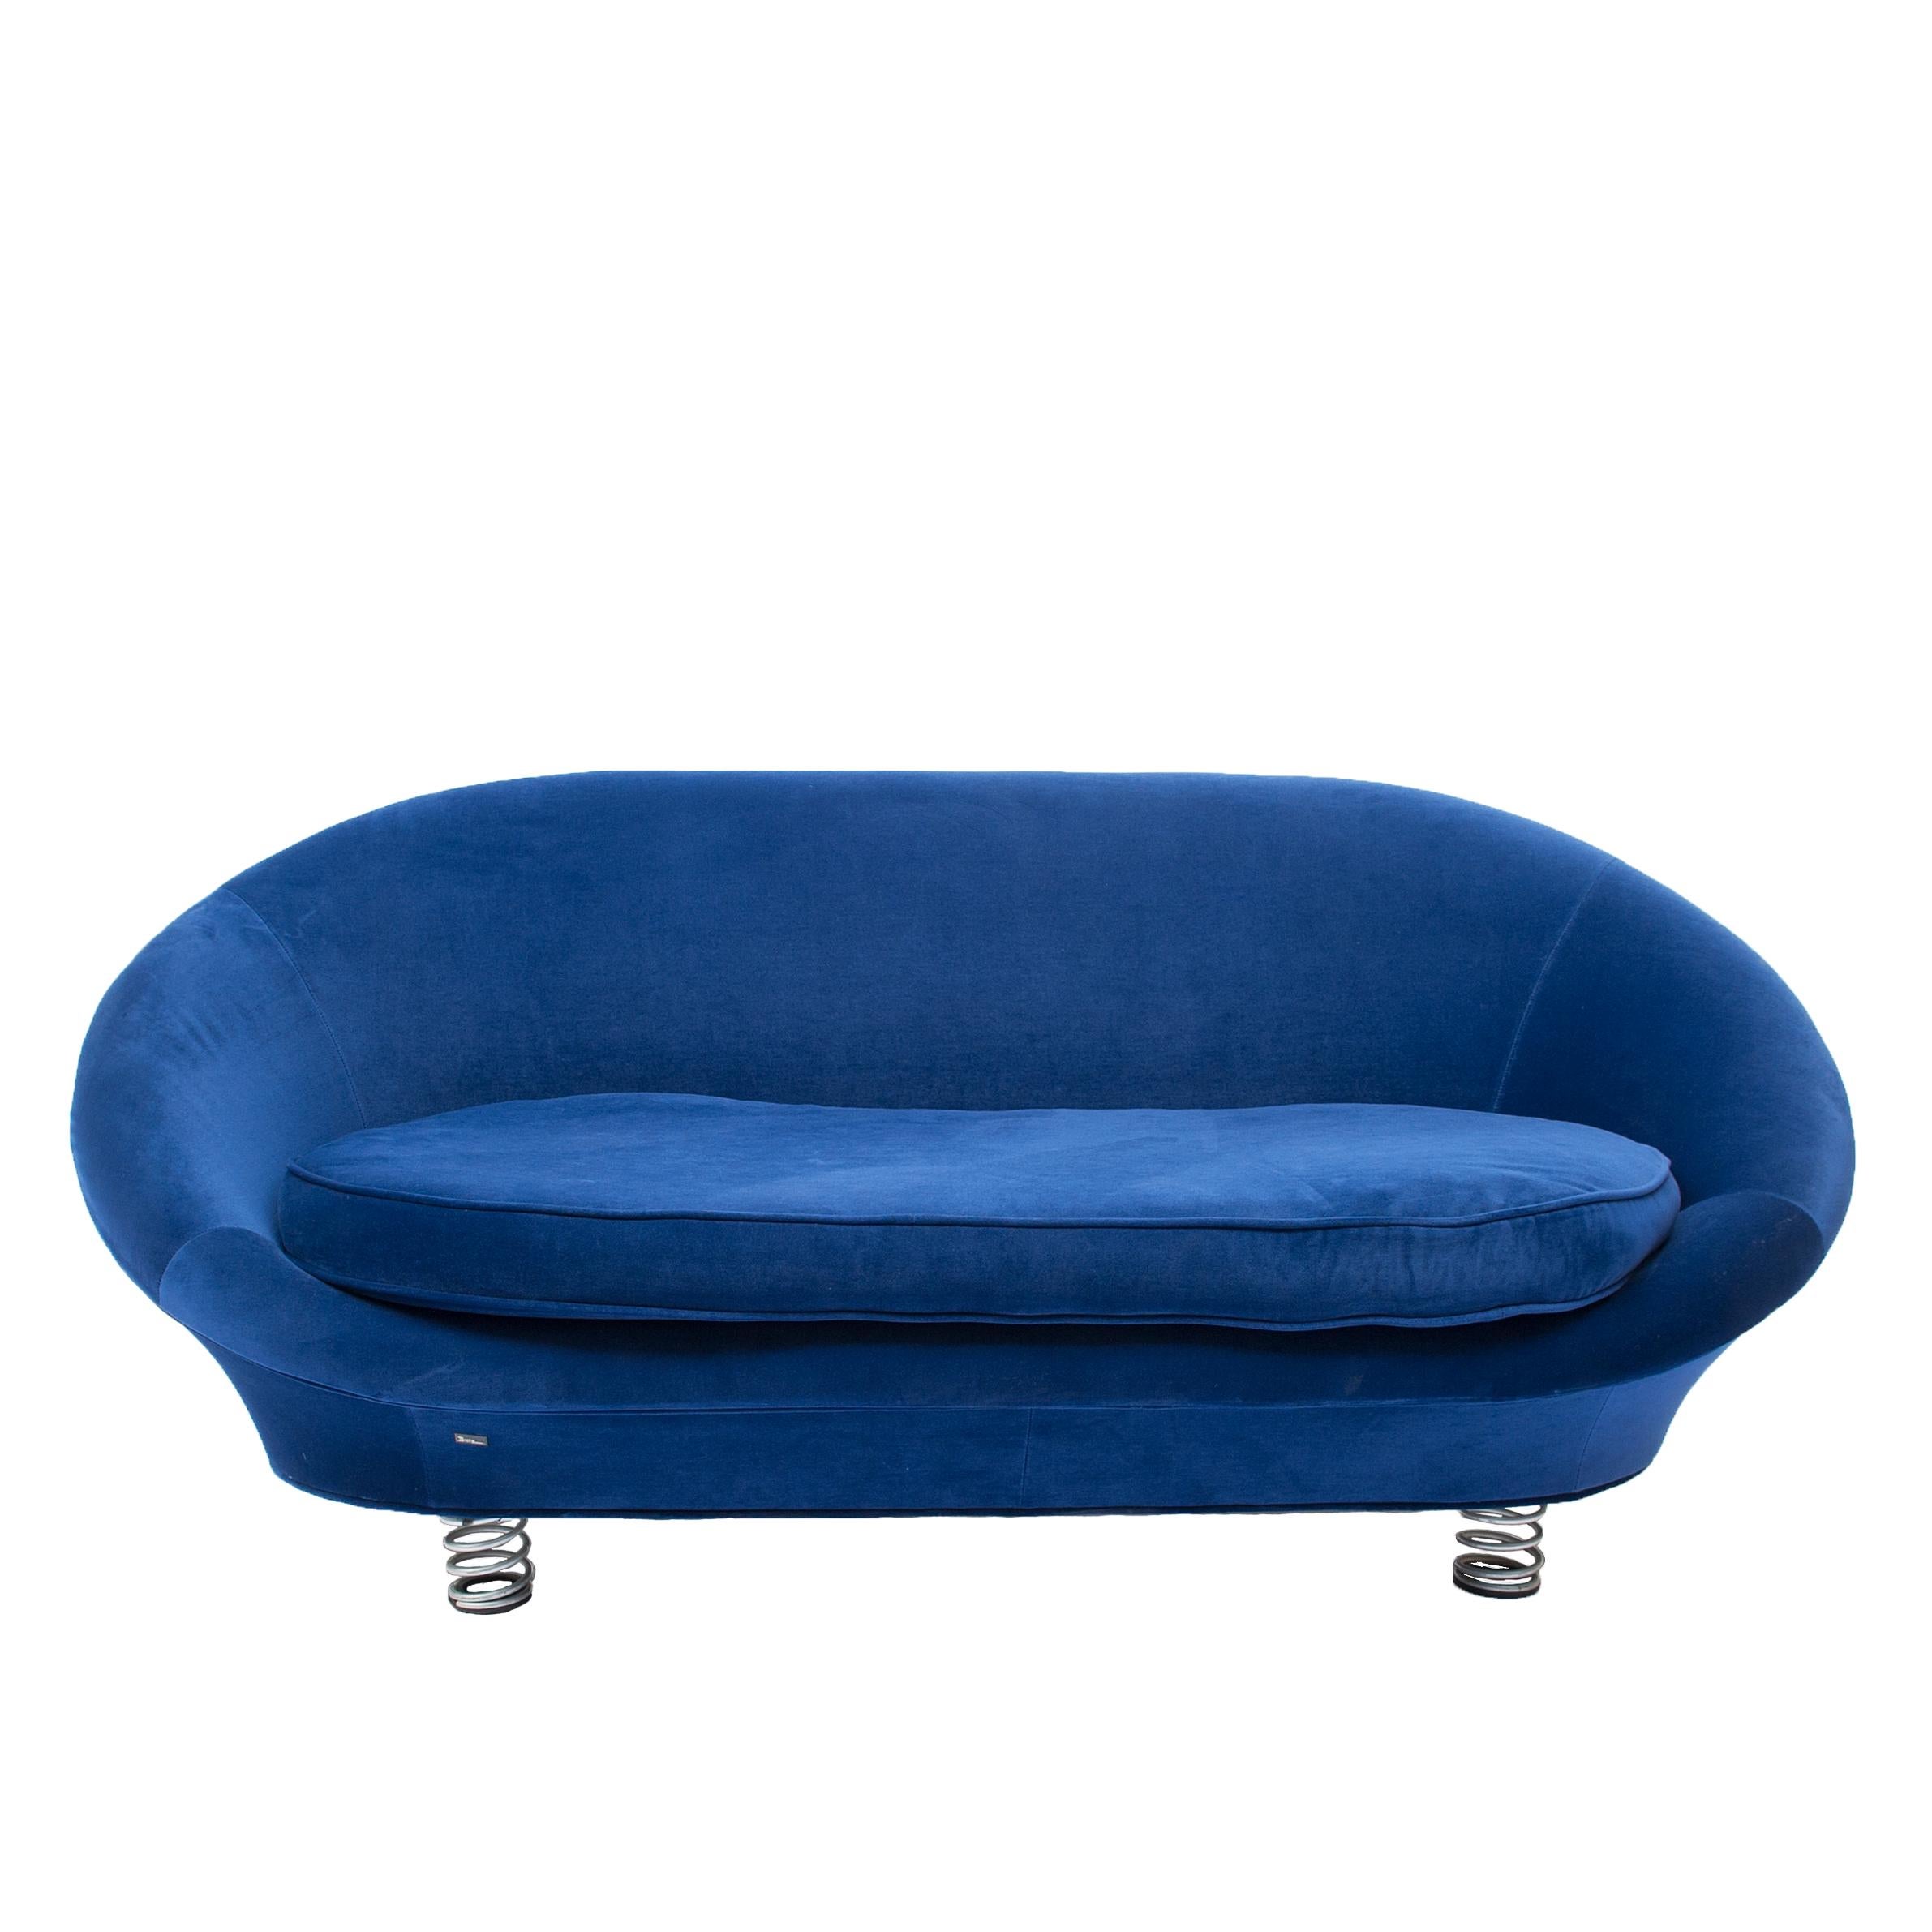 Blue velvet lounge “Loop” sofa designed by Bretz, Germany, 1980s. Very contemporary and comfortable lounge sofa in a very good vintage condition.